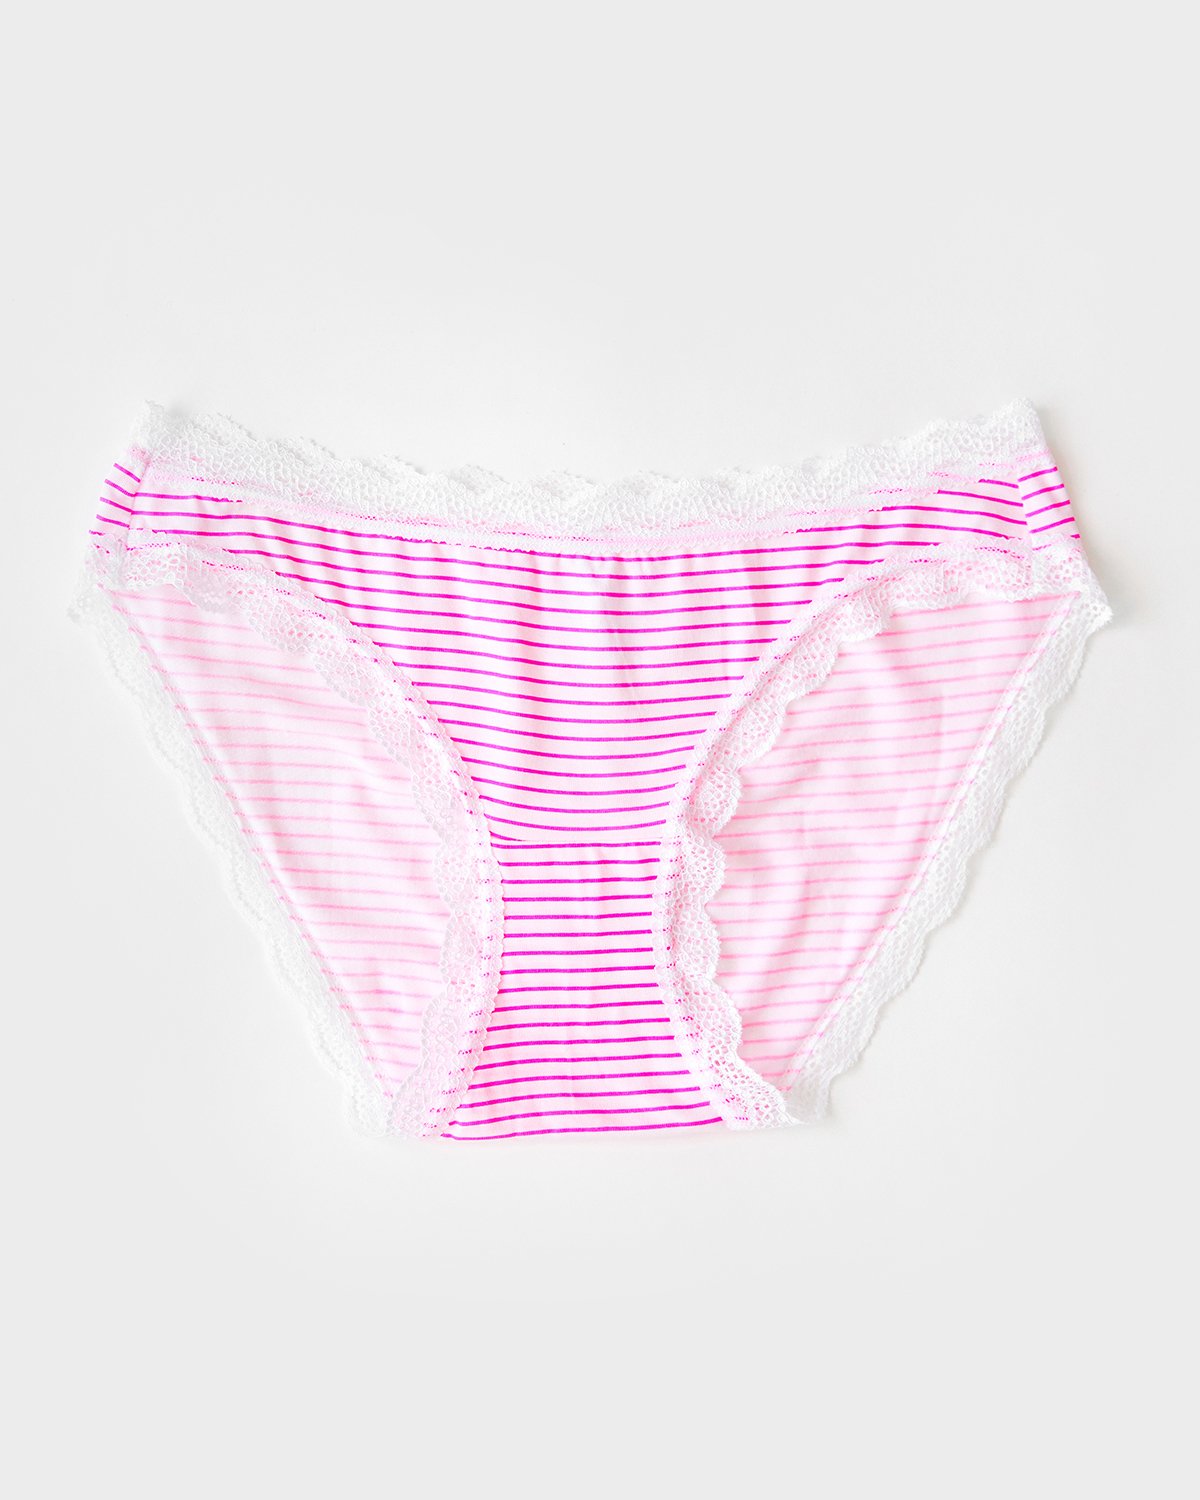 ahmed elgyar recommends pink and white striped panties pic